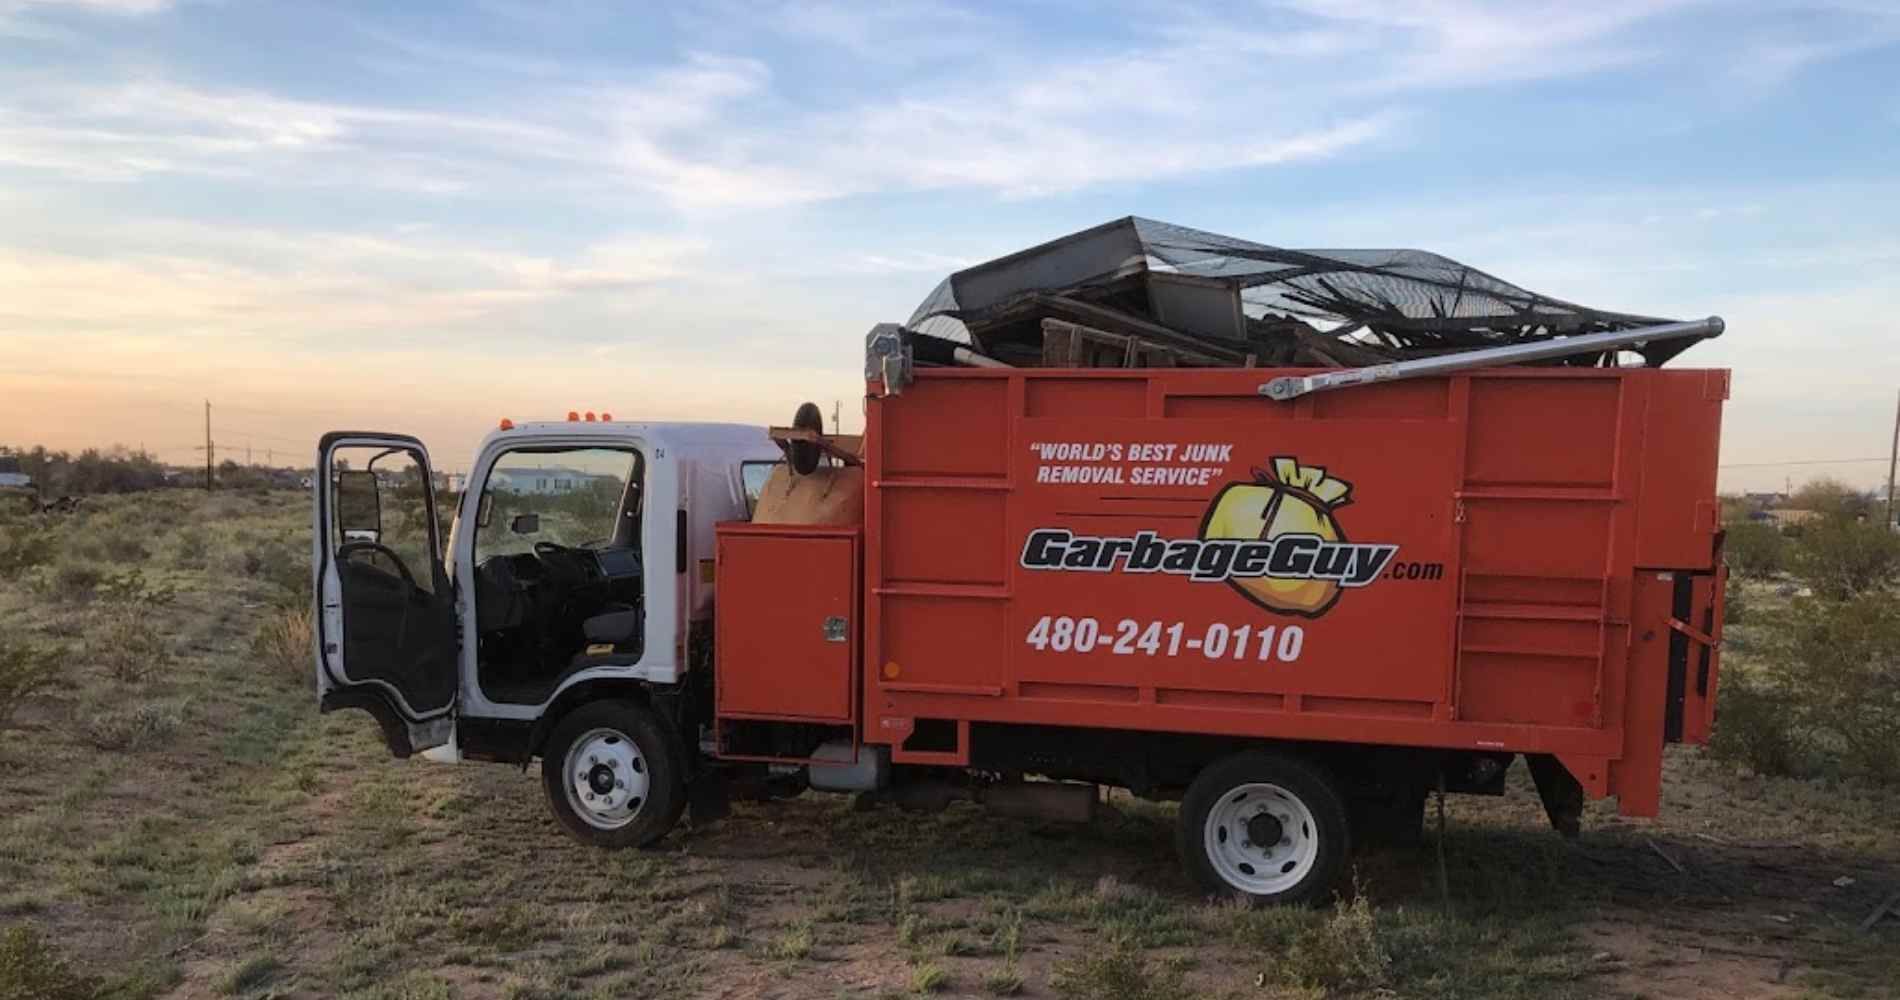 #1 for Junk Removal in Phoenix, AZ with Over 1200 5-Star Reviews!